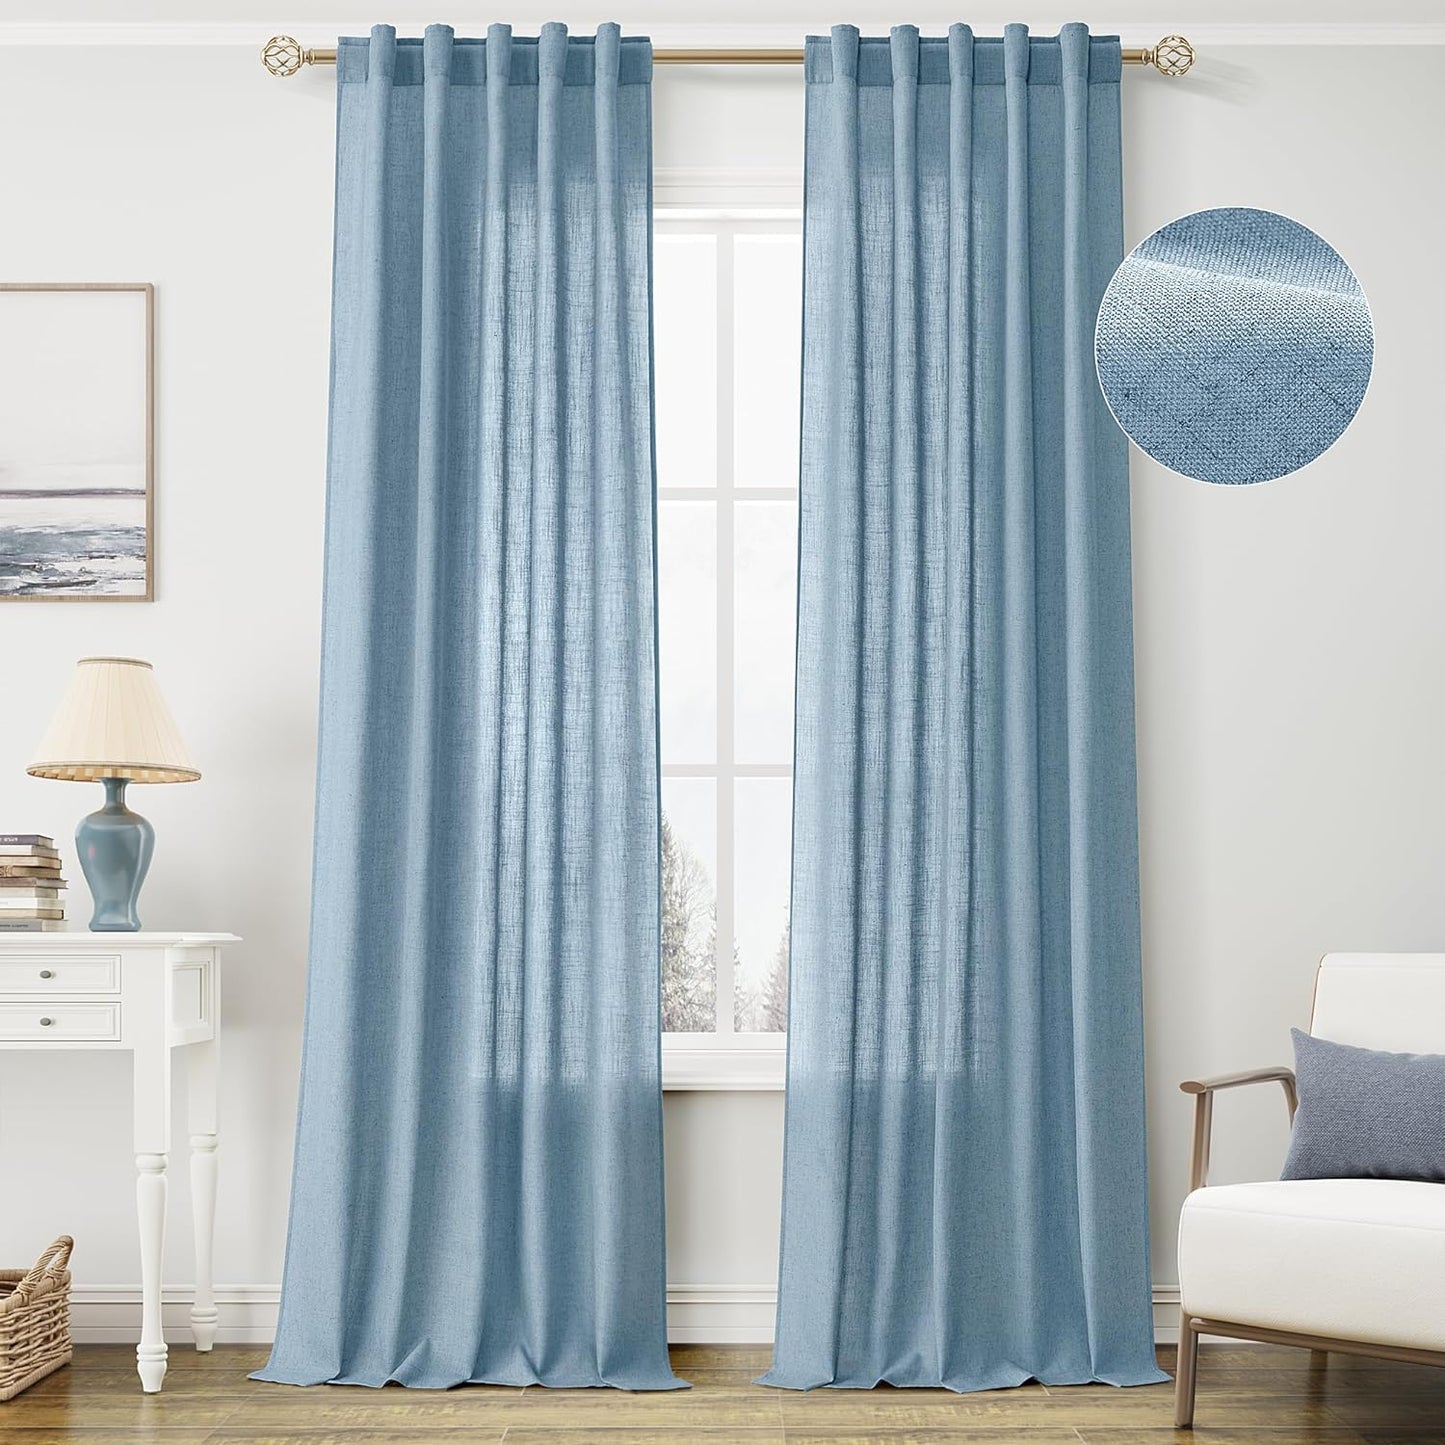 Natural Linen Sheer Curtains 84 Inch Long for Living Room Bedroom Back Tab Light Filtering Privacy Farmhouse Rod Pocket Ivory off White Neutral Drapes with Hooks 2 Panels Cream Beige  SPWIY Dusty Blue 40X108 